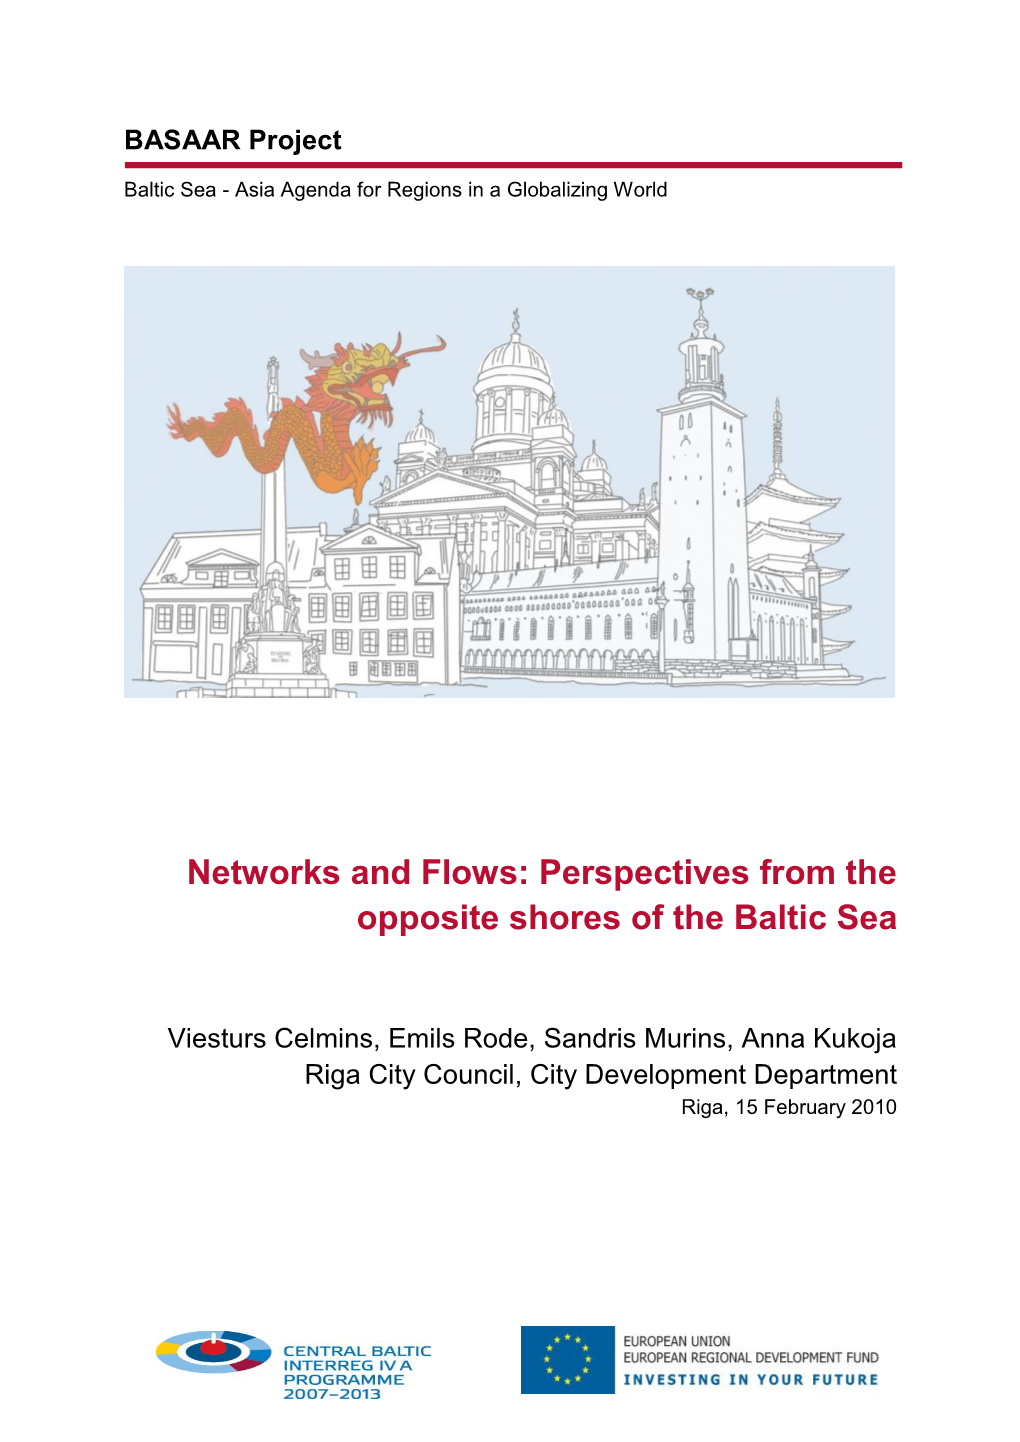 Networks and Flows: Perspectives from the Opposite Shores of the Baltic Sea